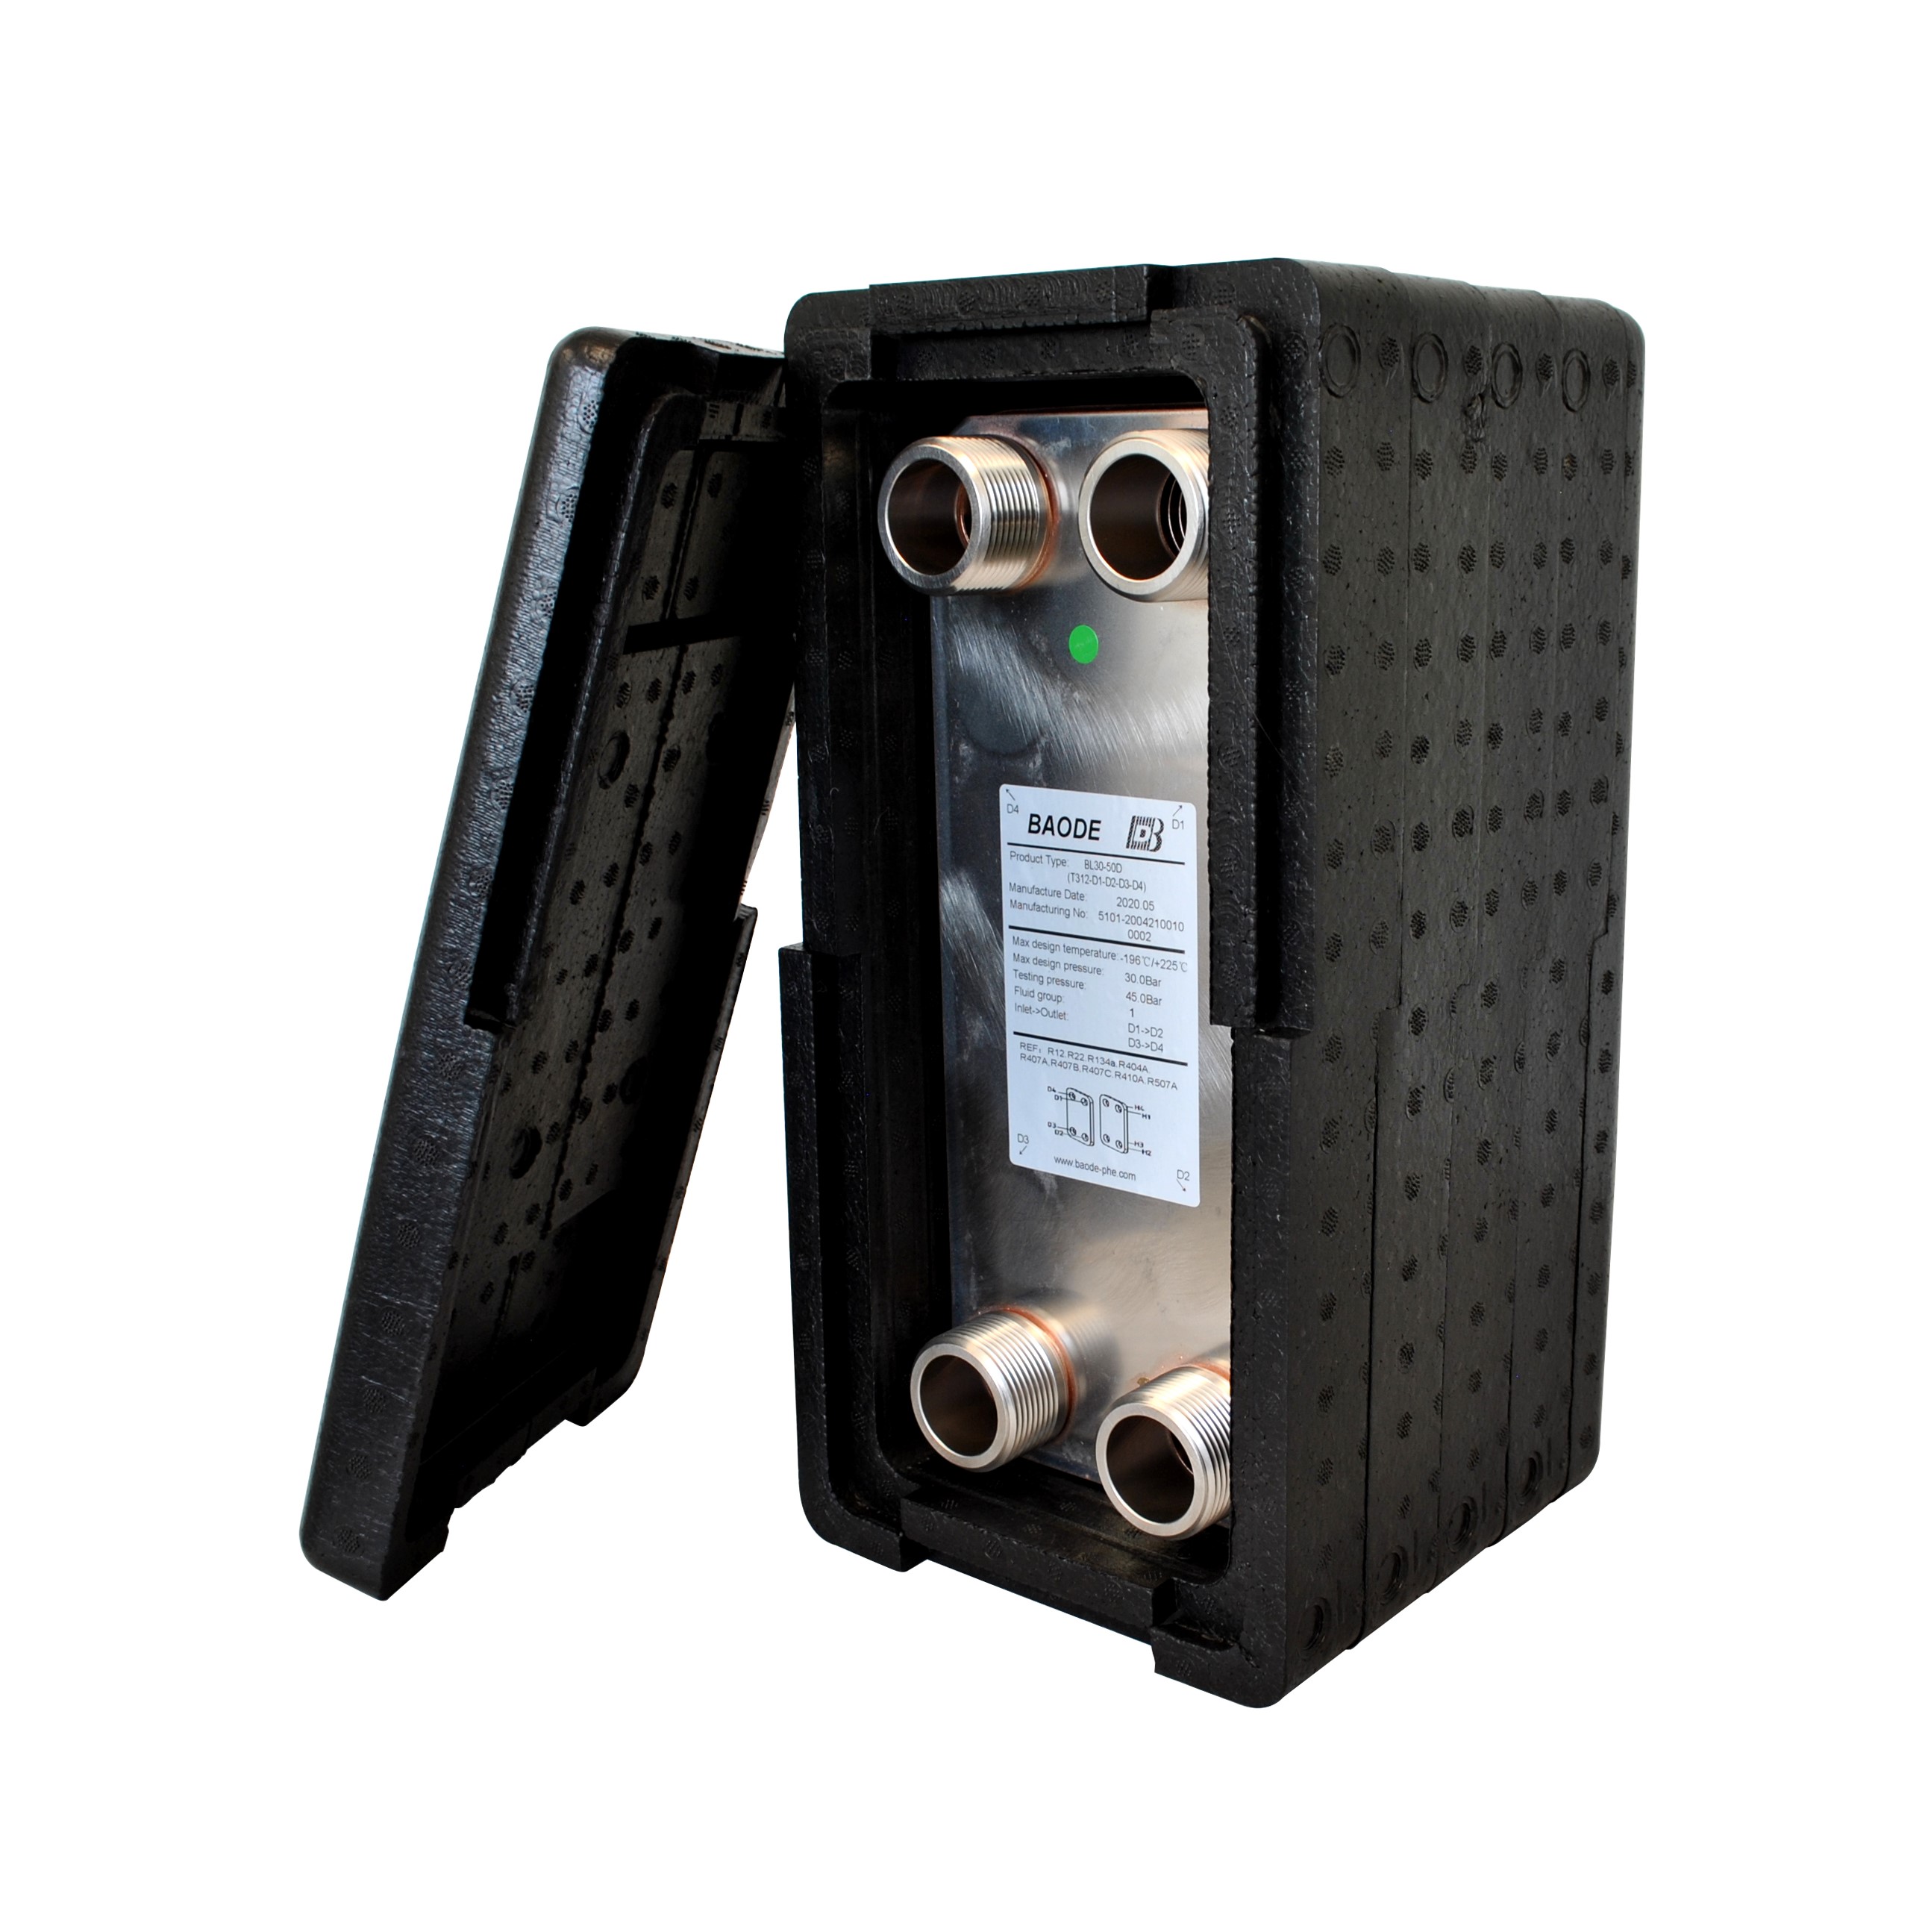 Baode BL26C Flat Plate Heat Exchanger - 50 Plate With Insulation Kit - 1.25